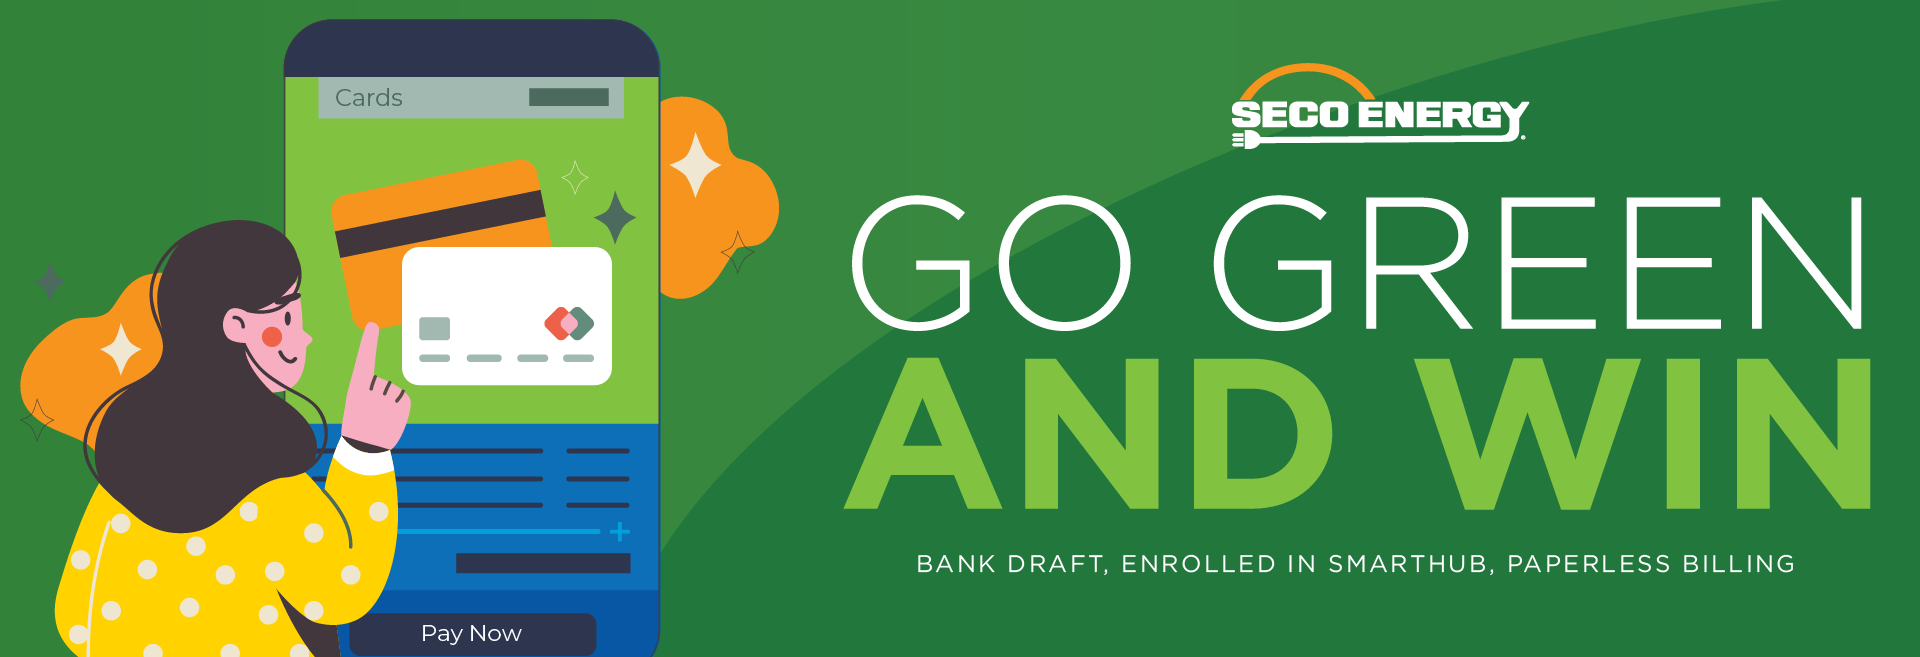 Go Green and Win. Bank draft, enrolled in smarthub, paperless billing